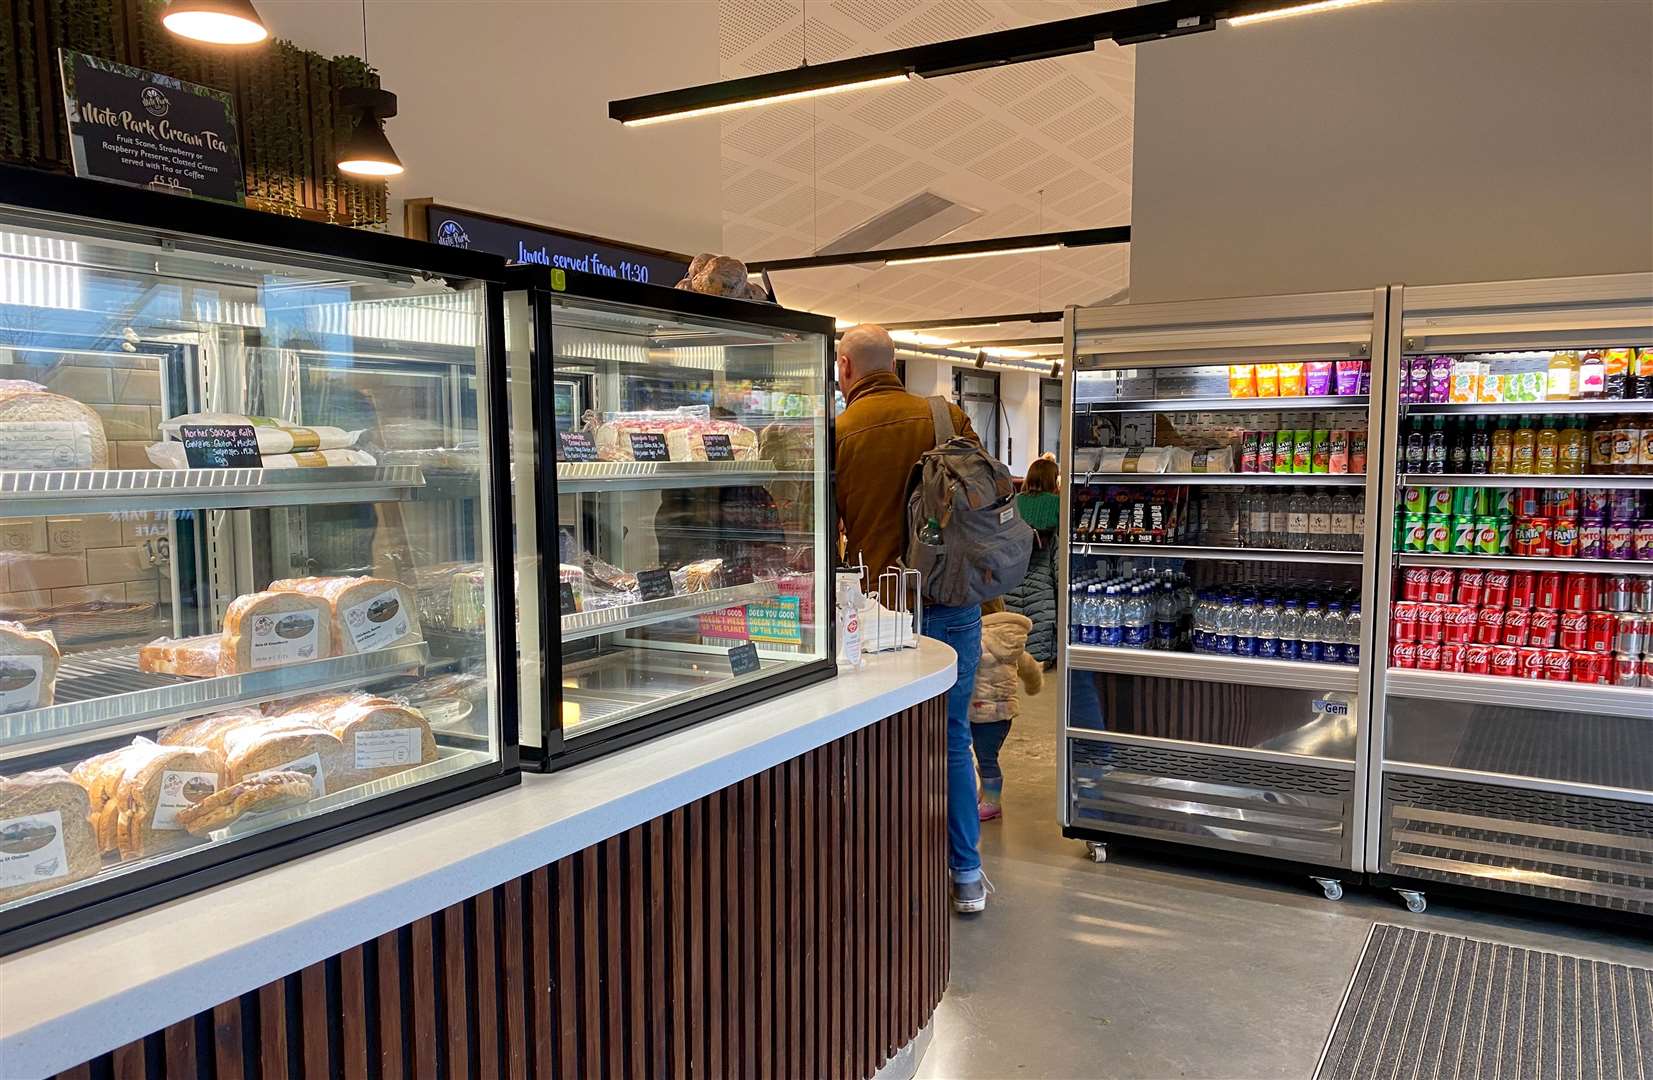 The café has a good selection of drinks and sandwiches, although the cakes were running low already and it was only just lunchtime. Picture: Sam Lawrie